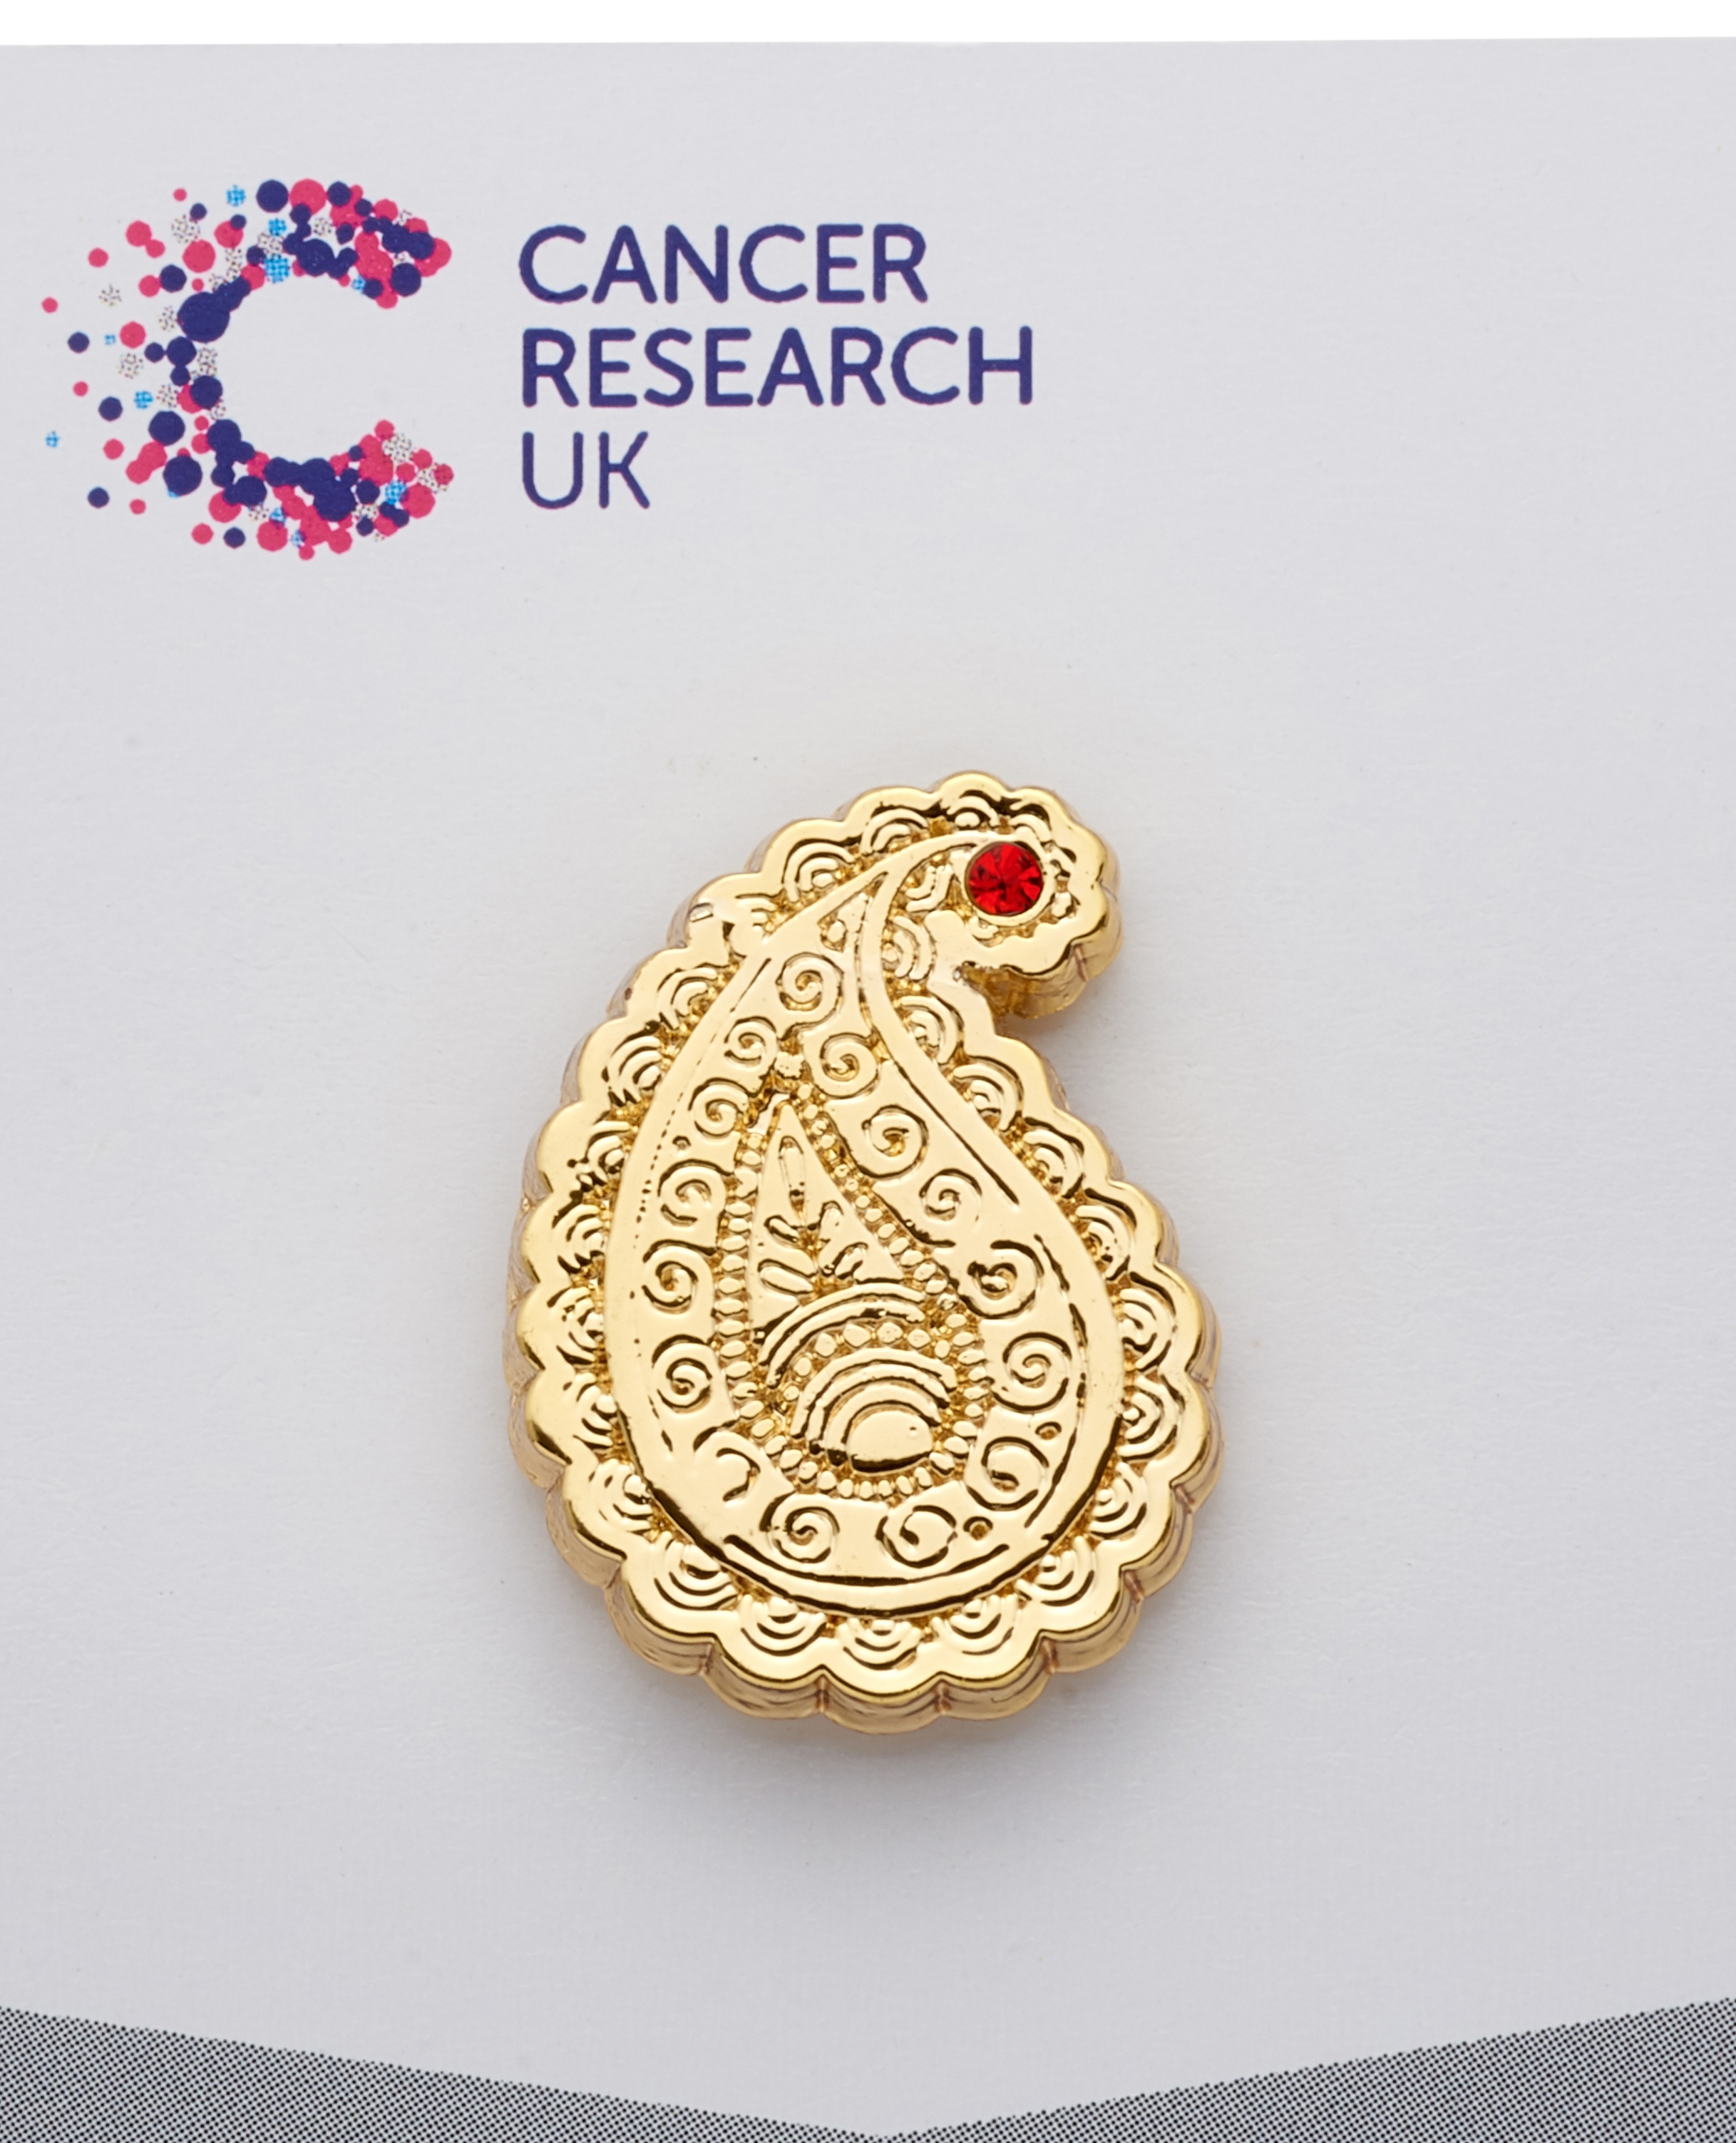 Pink Patterned Ribbon Cancer Research UK Charity Pin Badge 